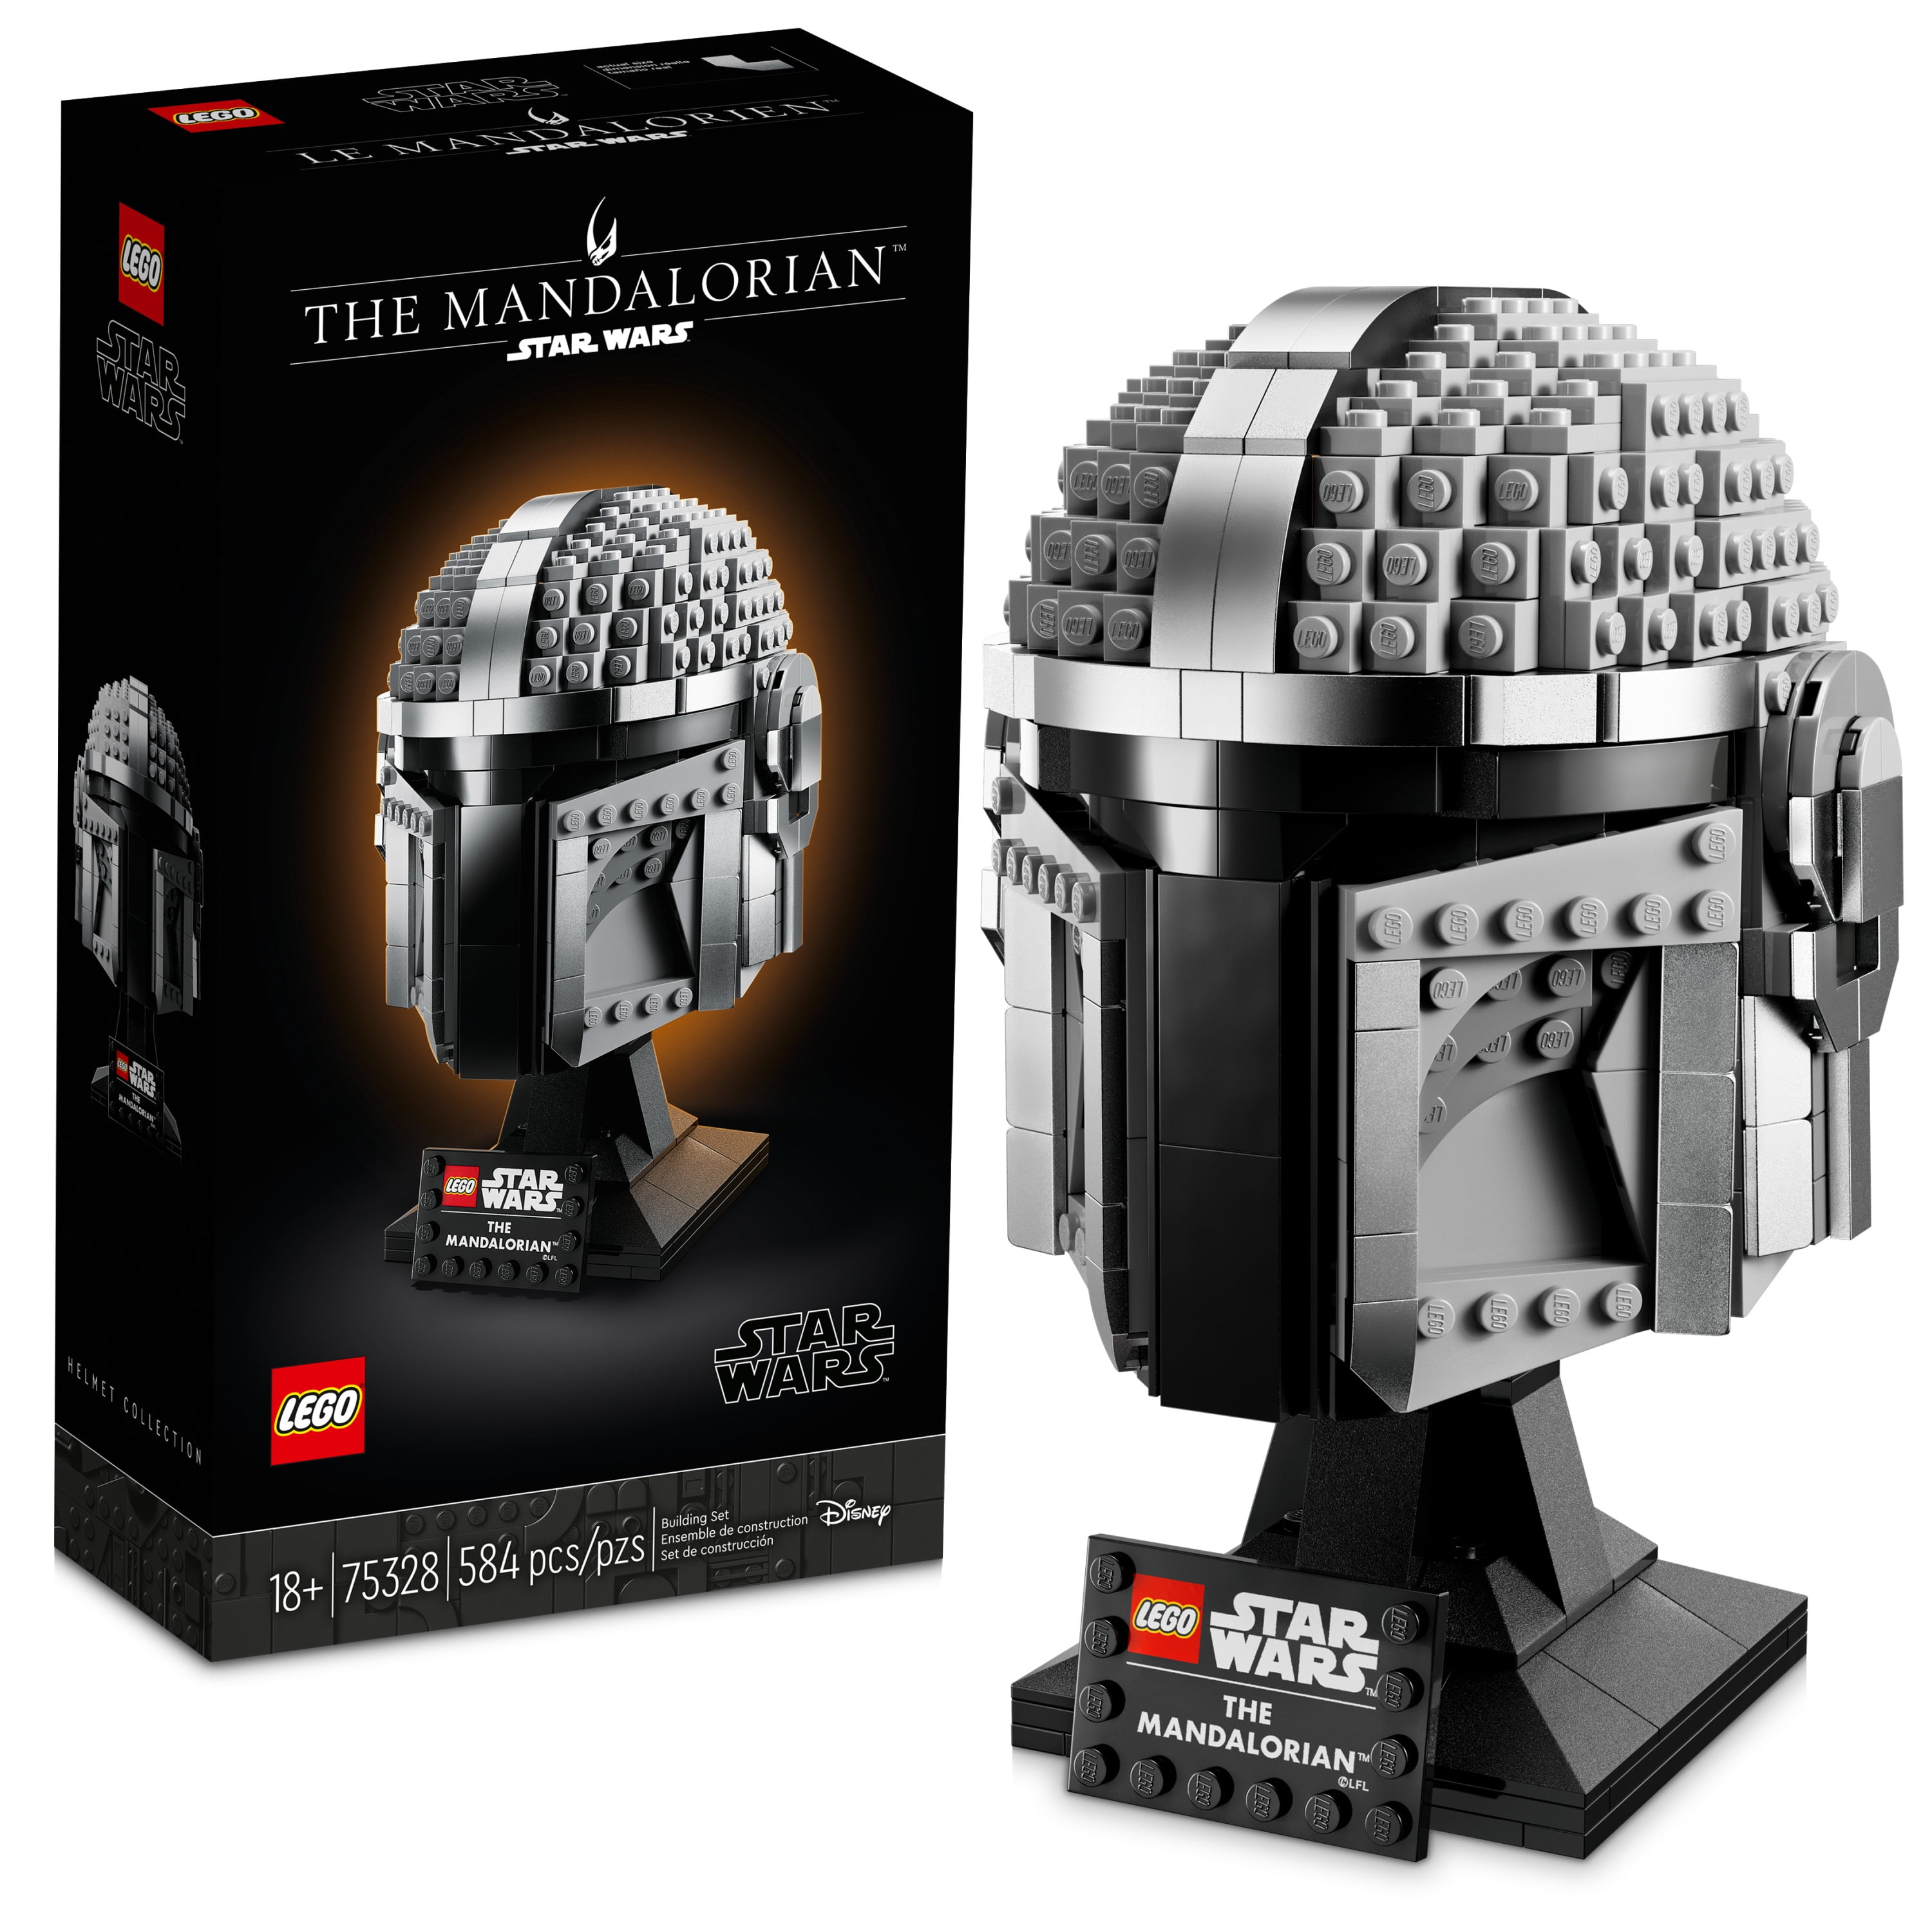 Inactivo Ir a caminar abrigo LEGO Star Wars The Mandalorian Helmet 75328 Creative Building Kit for  Adults; Collectible Build-and-Display Model; Fun Holiday Gift, Birthday  Present or Surprise Treat for Fans (584 Pieces) - Walmart.com